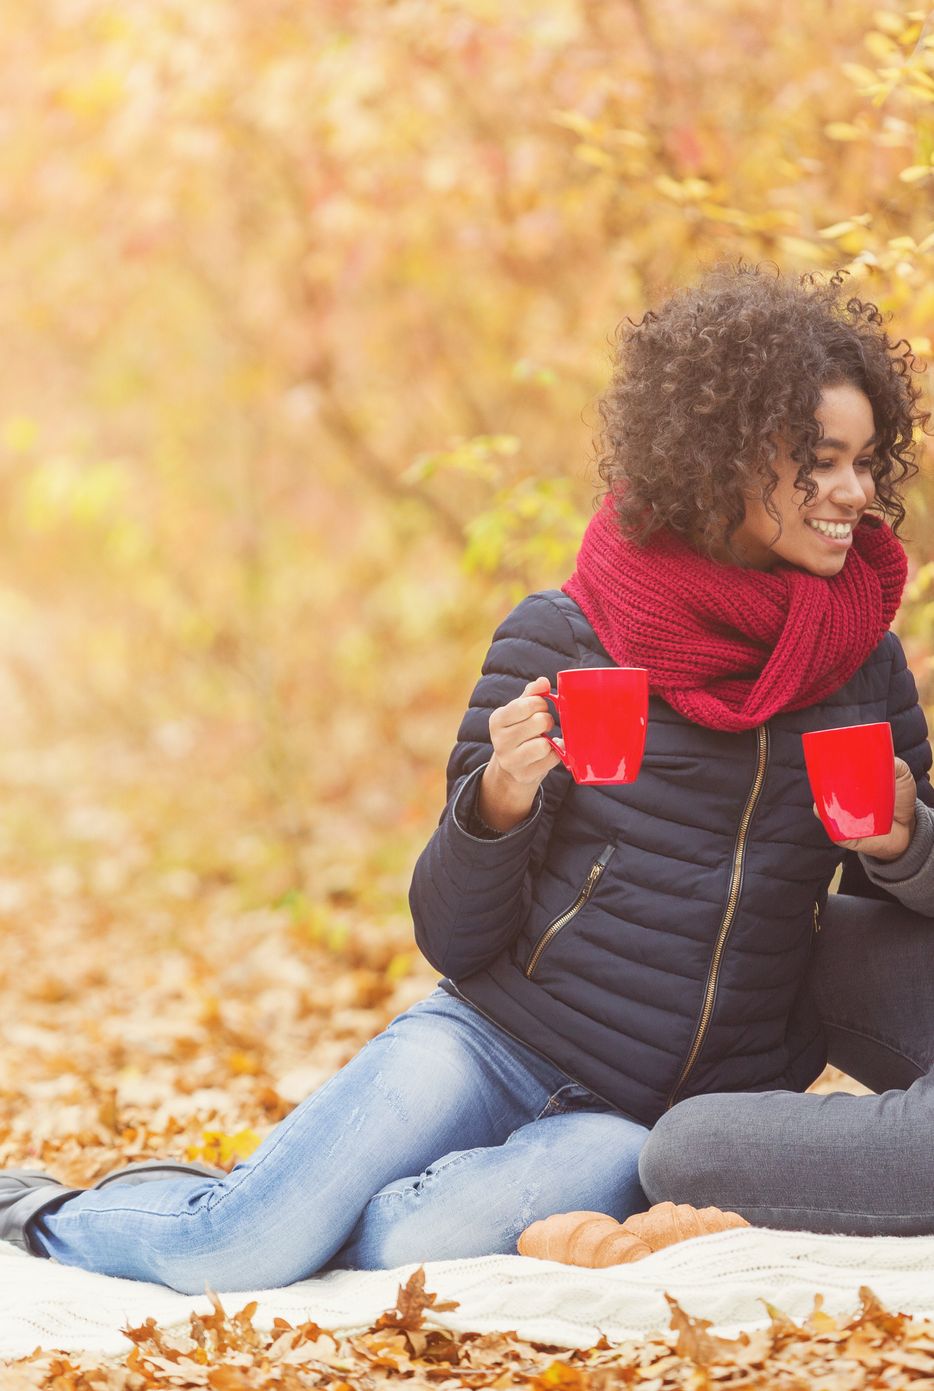 25 Fall Date Ideas to Make the Most of Fall - Friday We're In Love